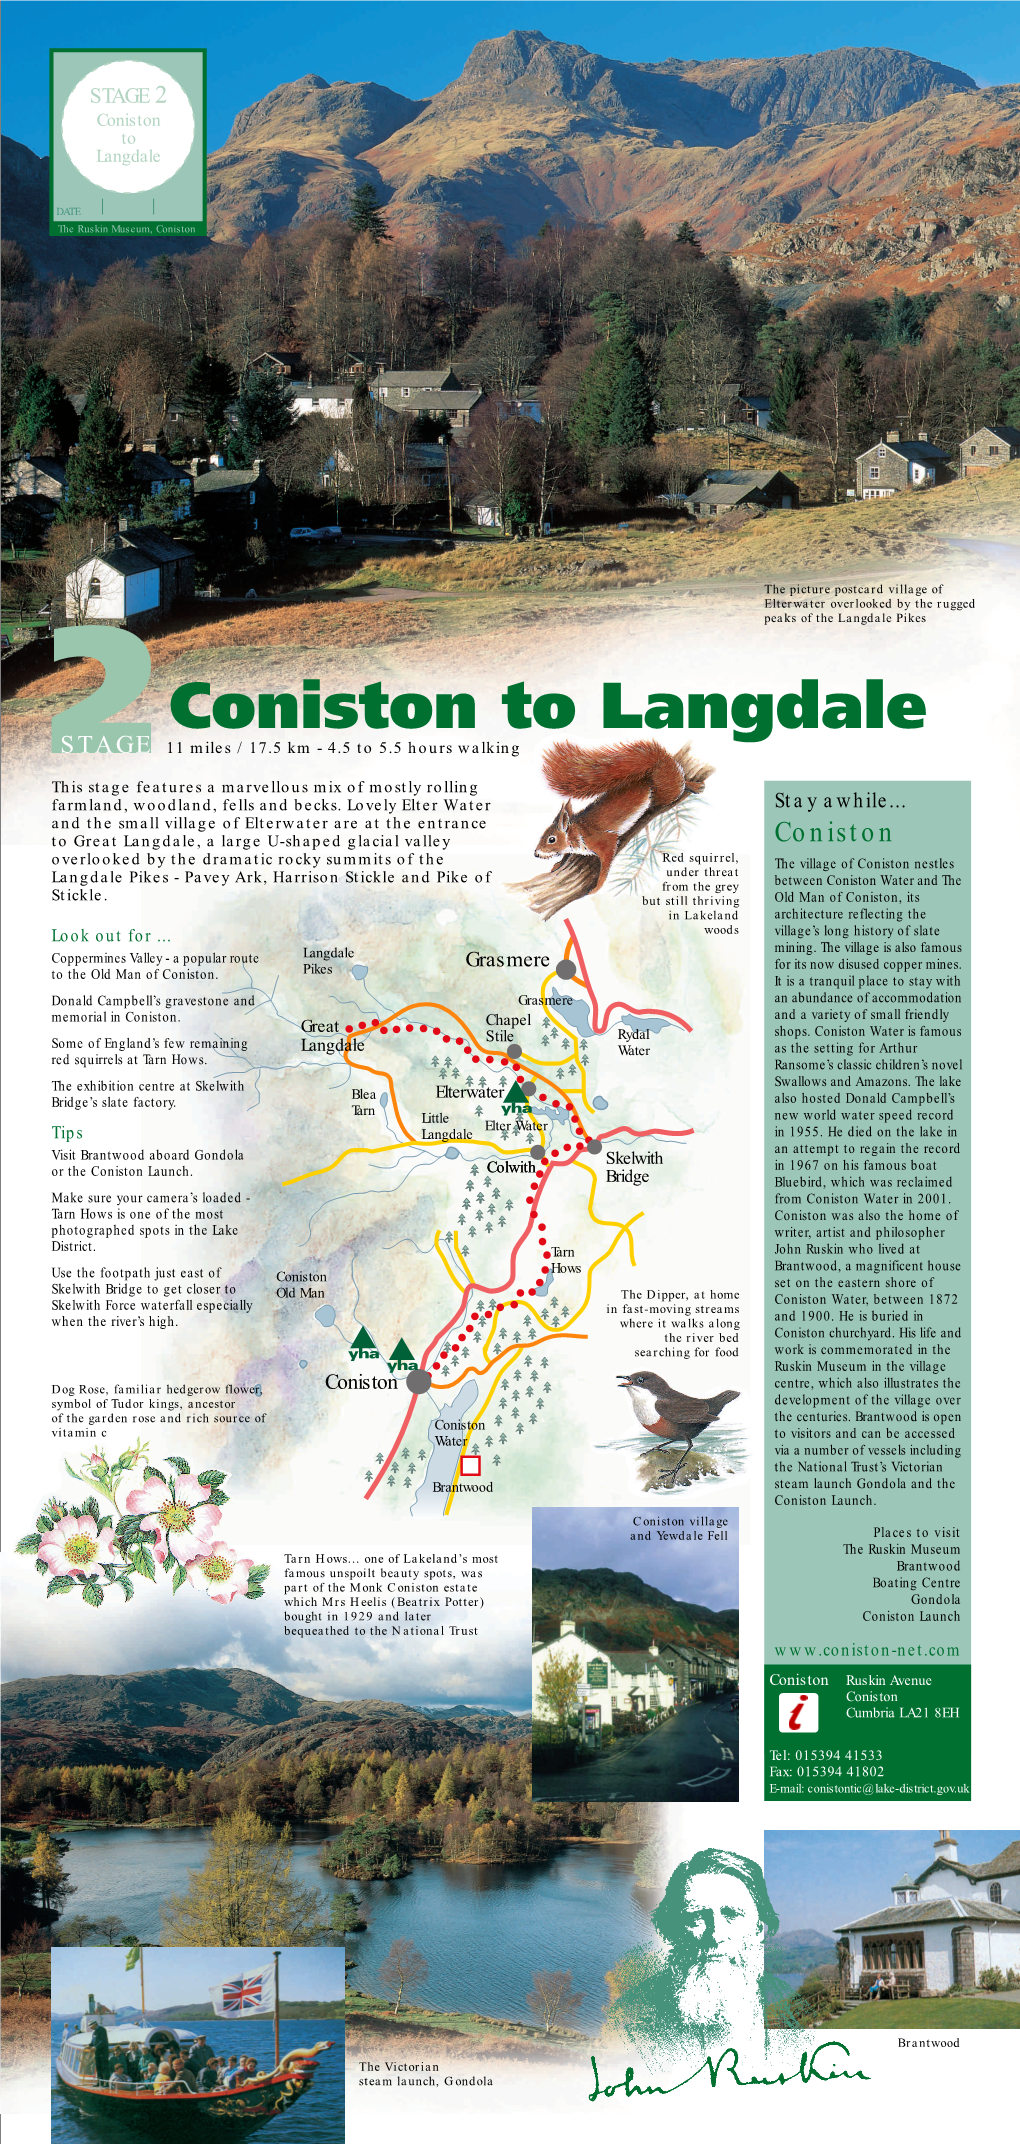 Coniston to Langdale